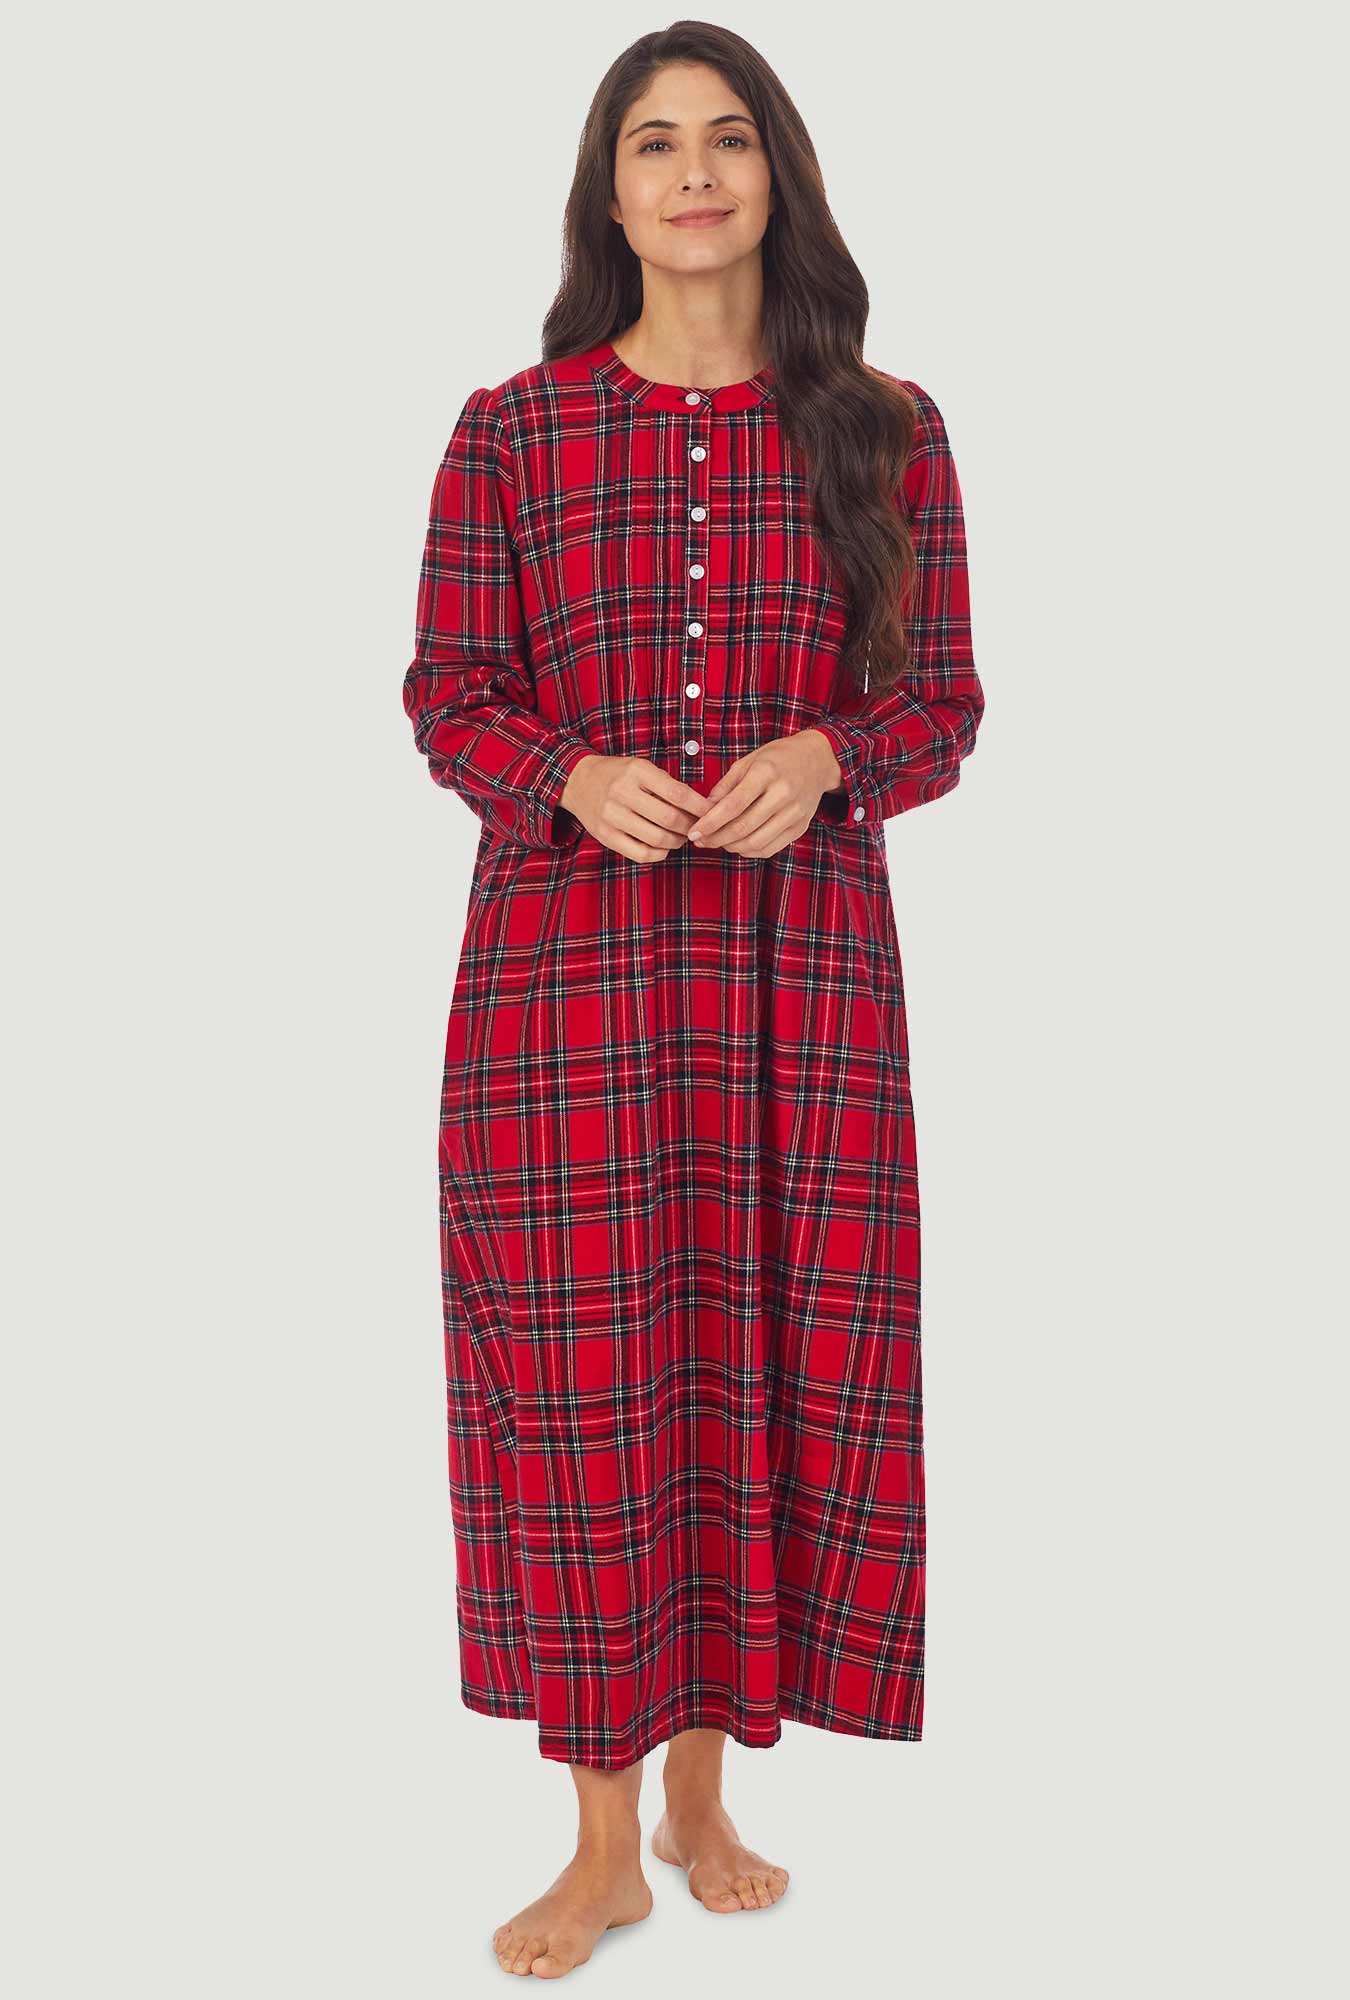 A lady wearing a red tartan long sleeve sweet and simple flannel gown.